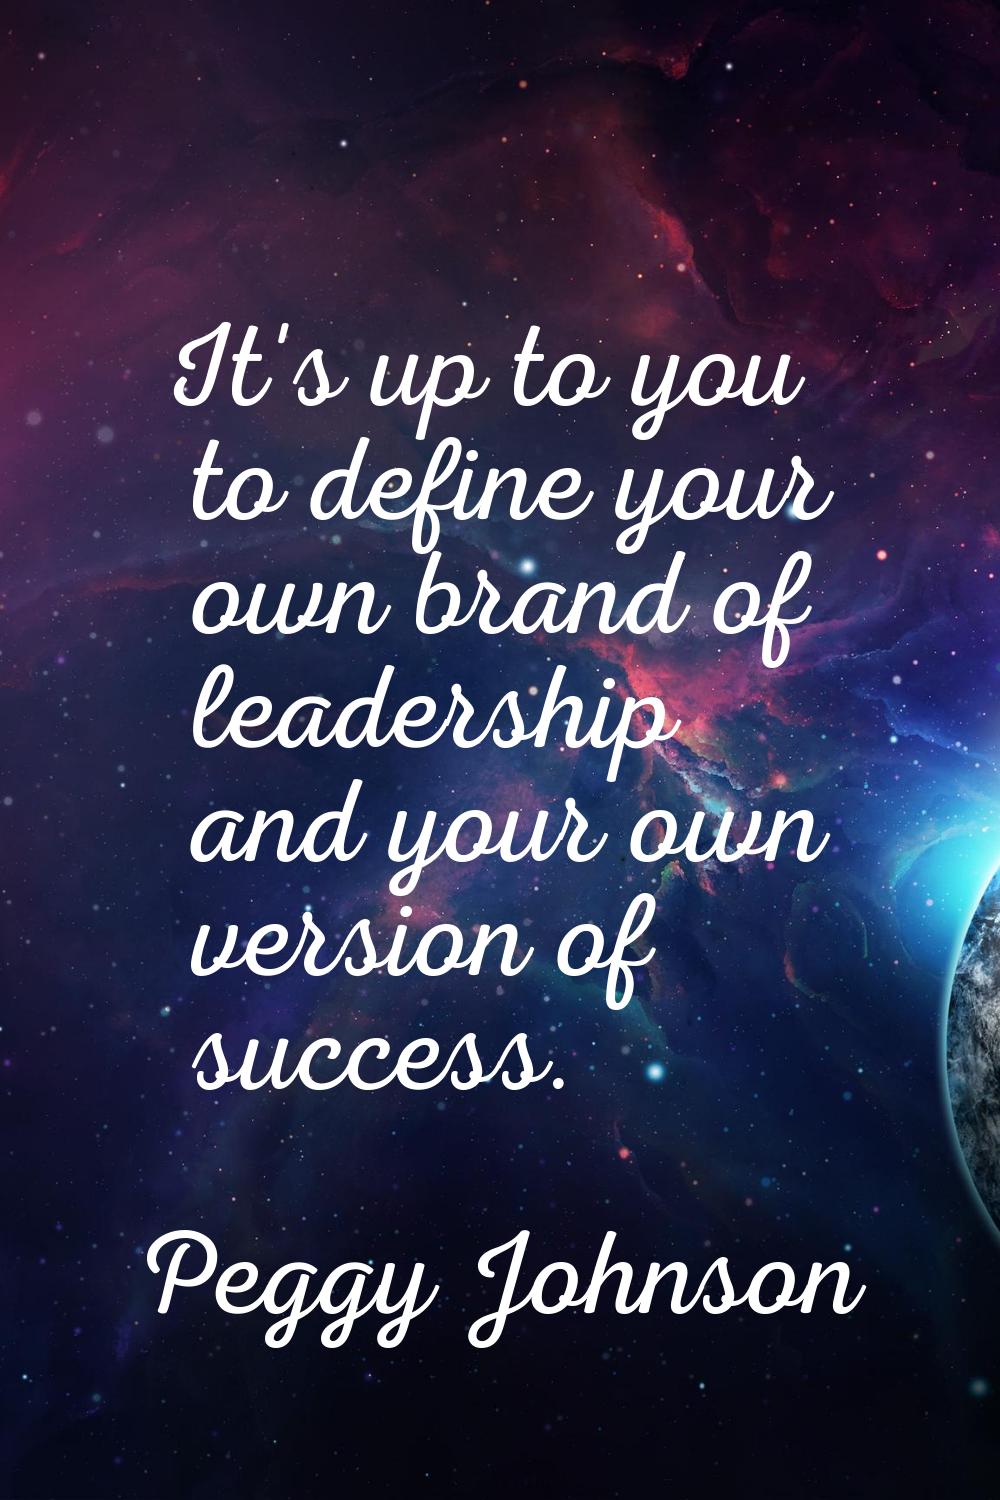 It's up to you to define your own brand of leadership and your own version of success.